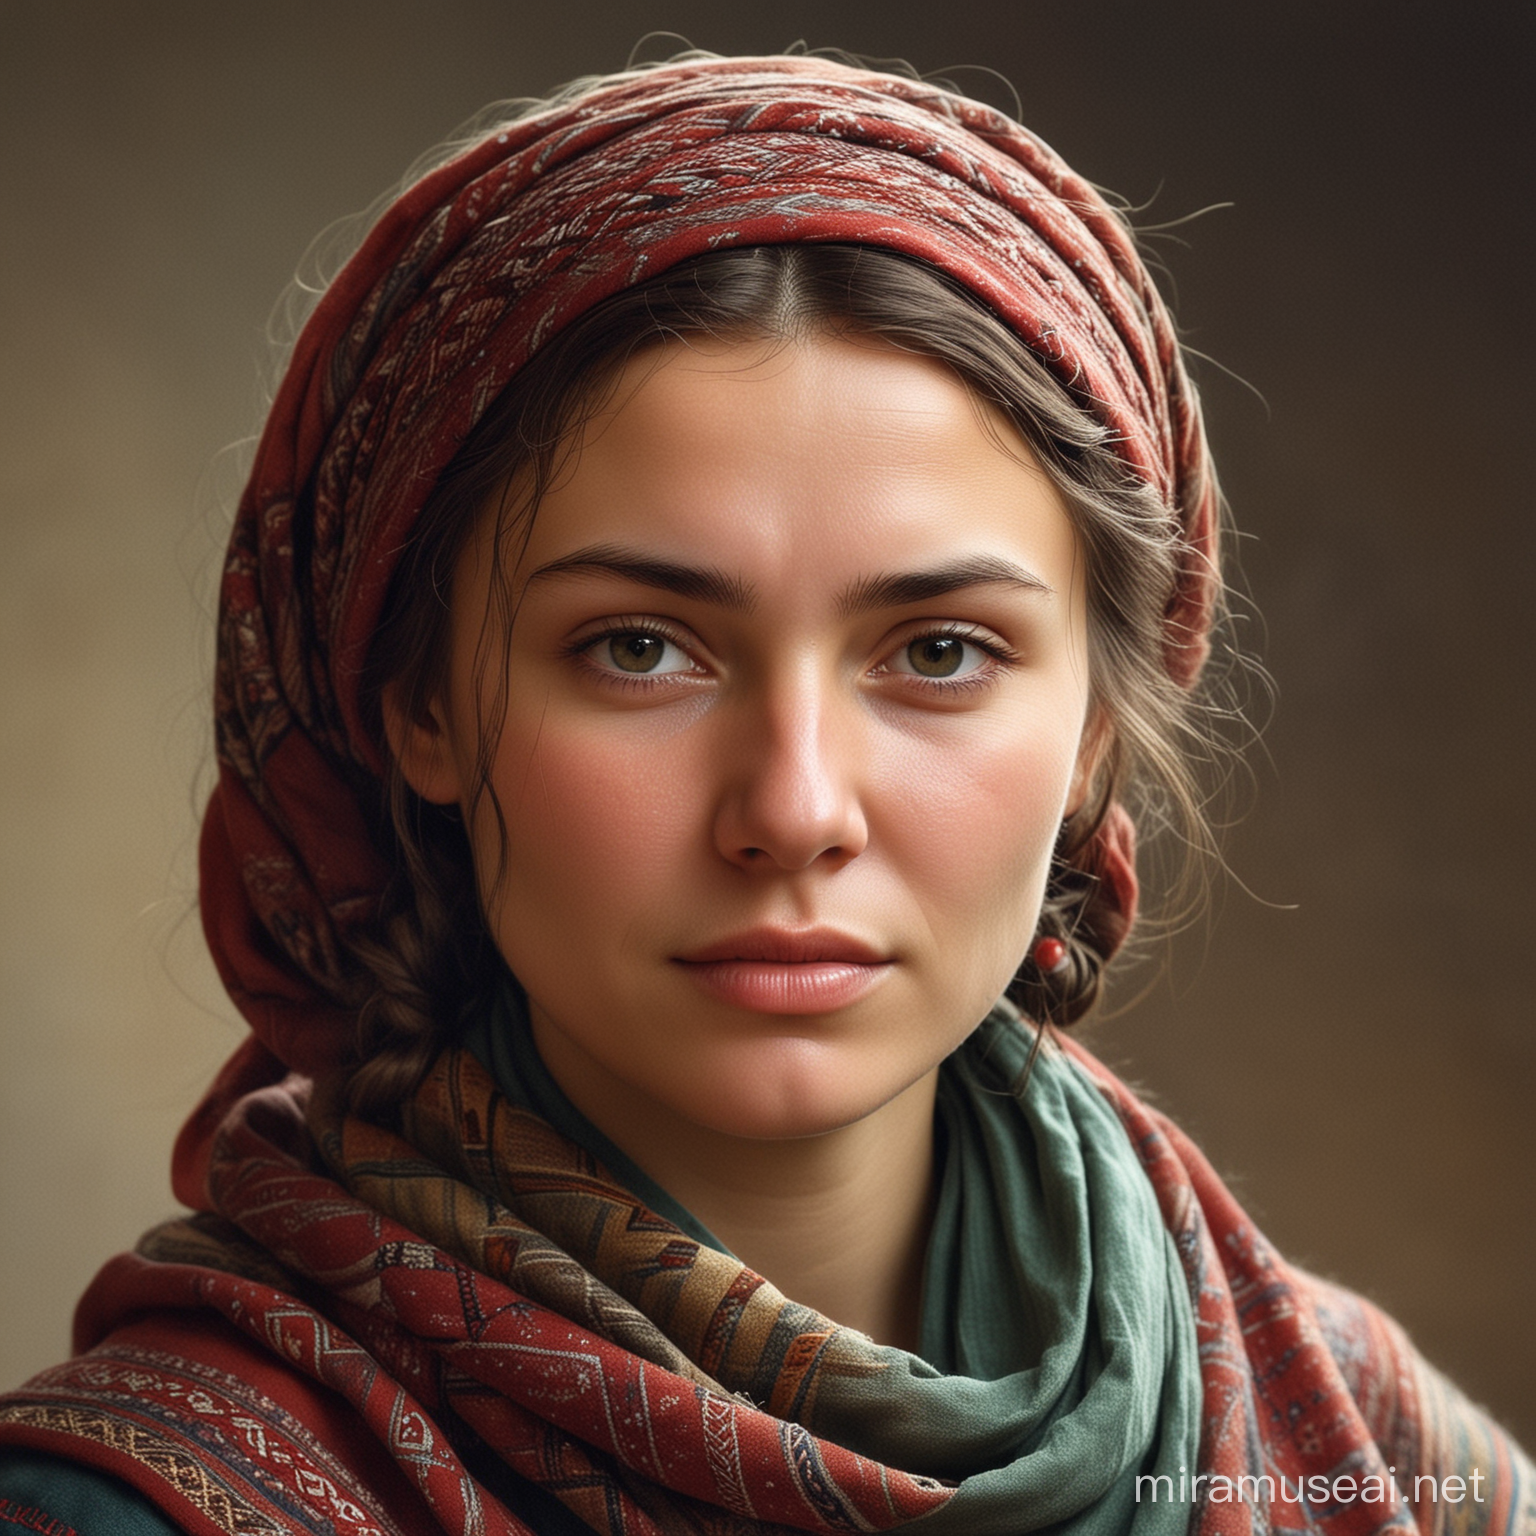 Strong Peasant Woman Kateryna Portrait